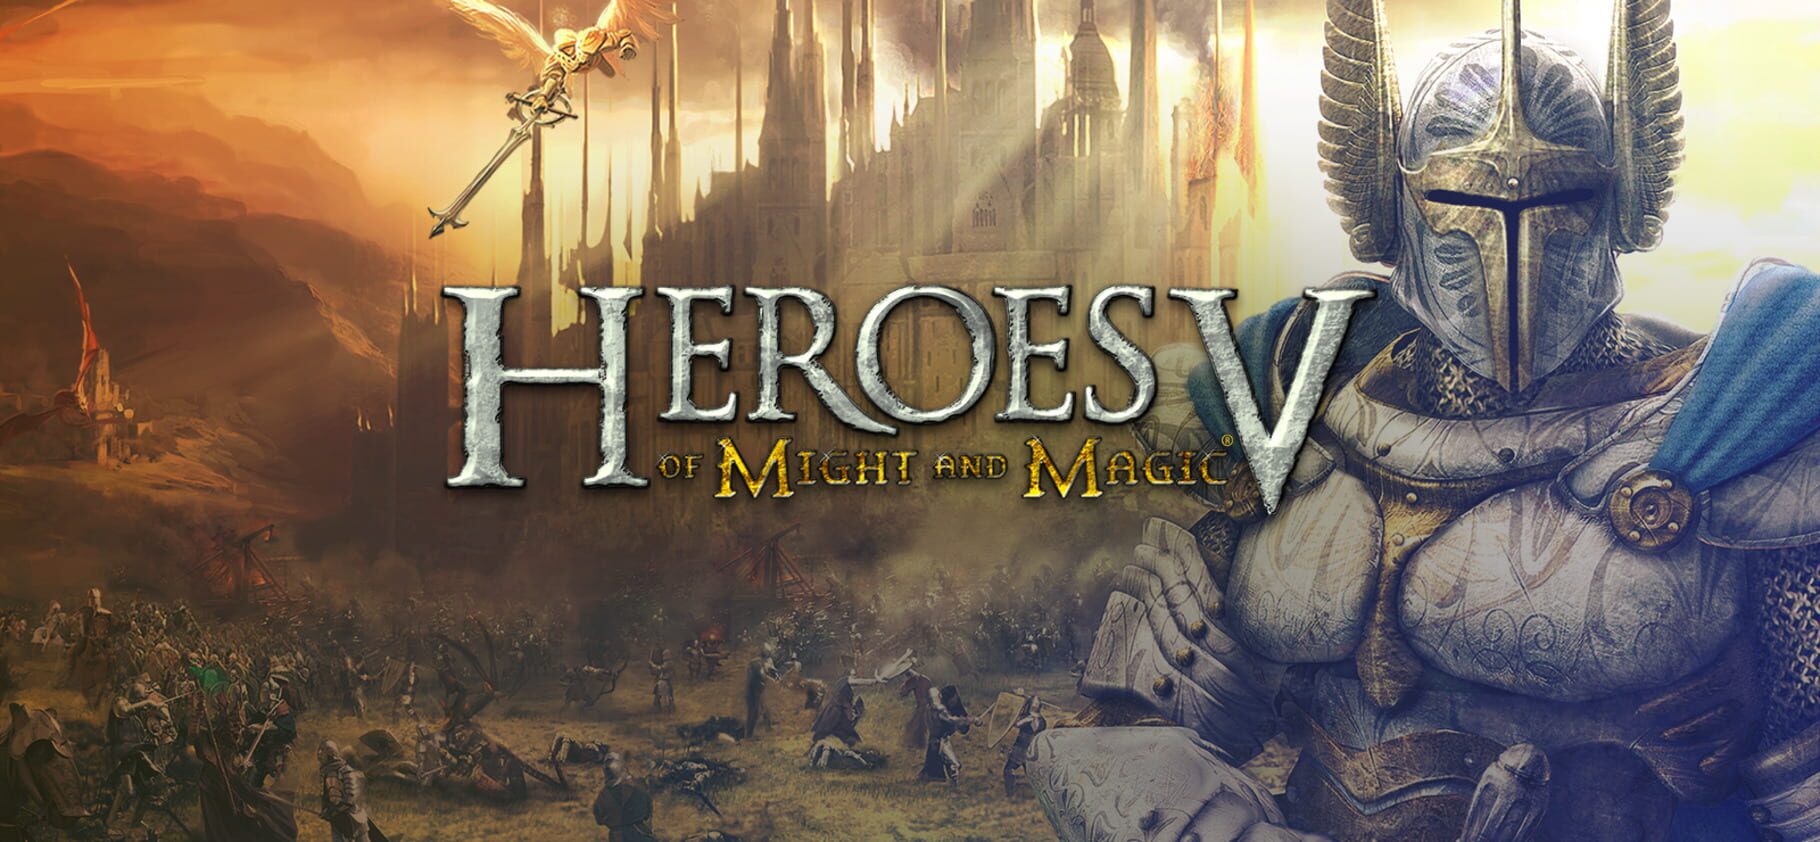 Heroes of might and magic 5 on steam фото 84